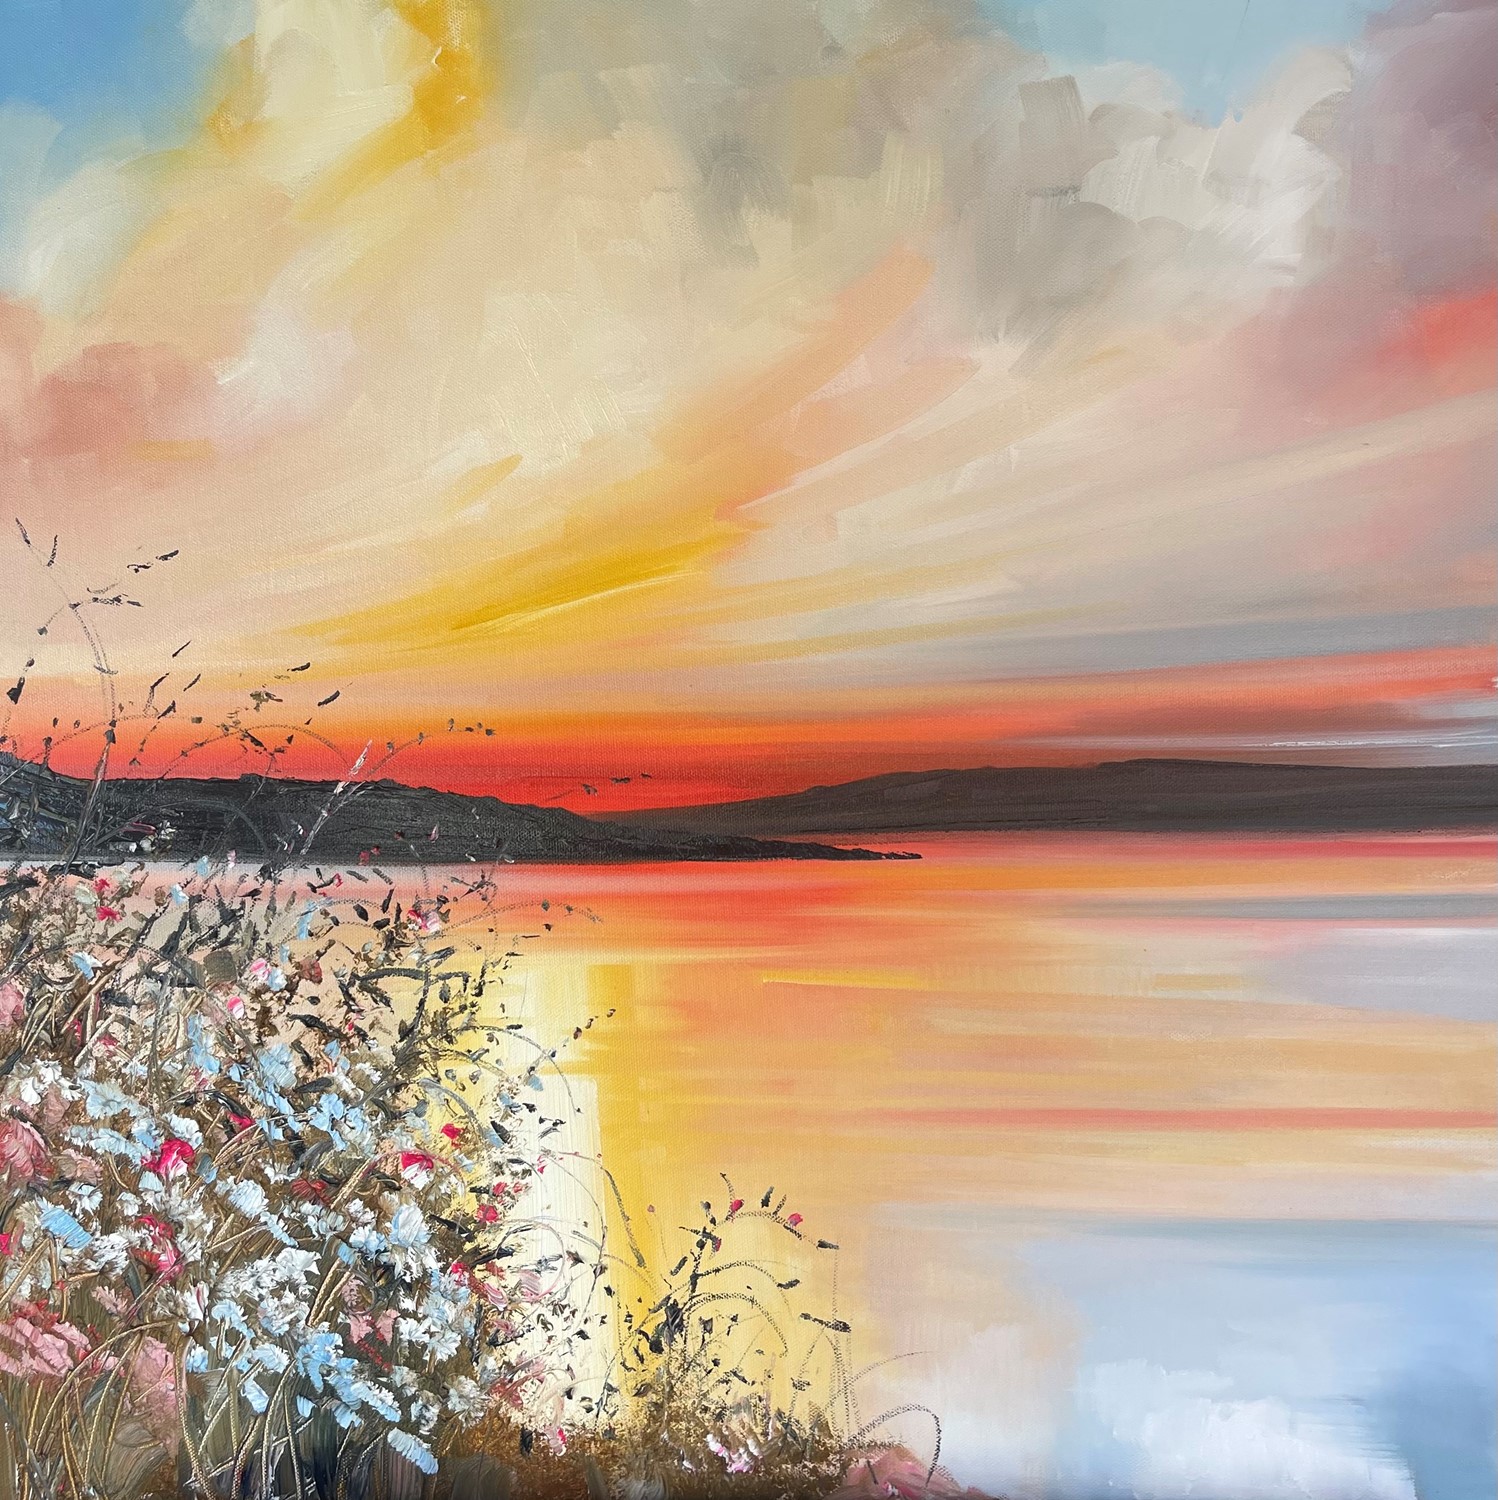 'Sunset from the hedgerows' by artist Rosanne Barr